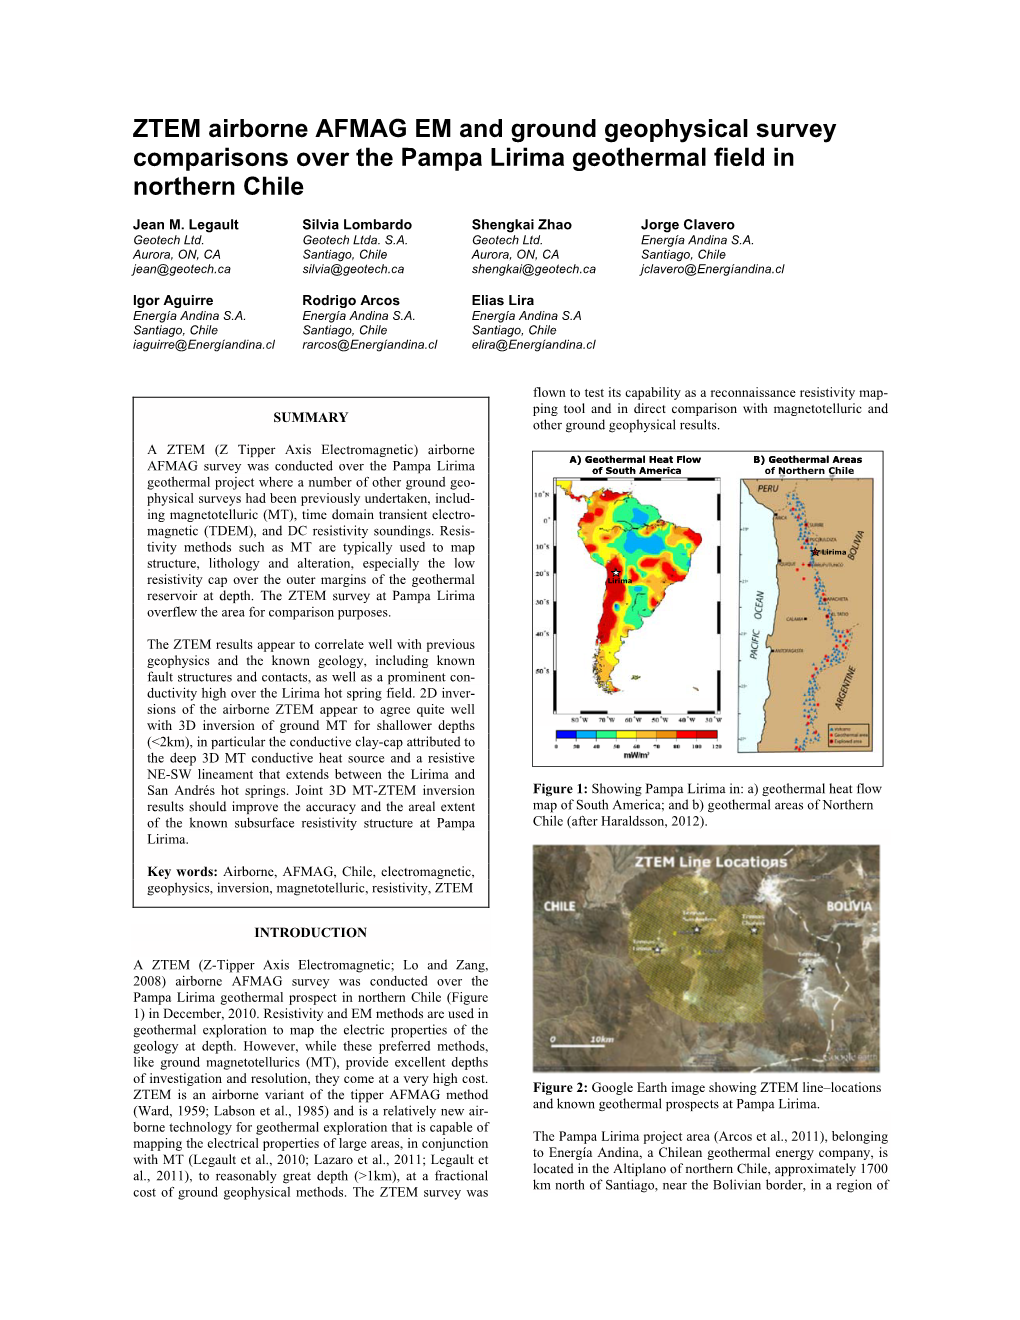 ZTEM Airborne AFMAG EM and Ground Geophysical Survey Comparisons Over the Pampa Lirima Geothermal Field in Northern Chile